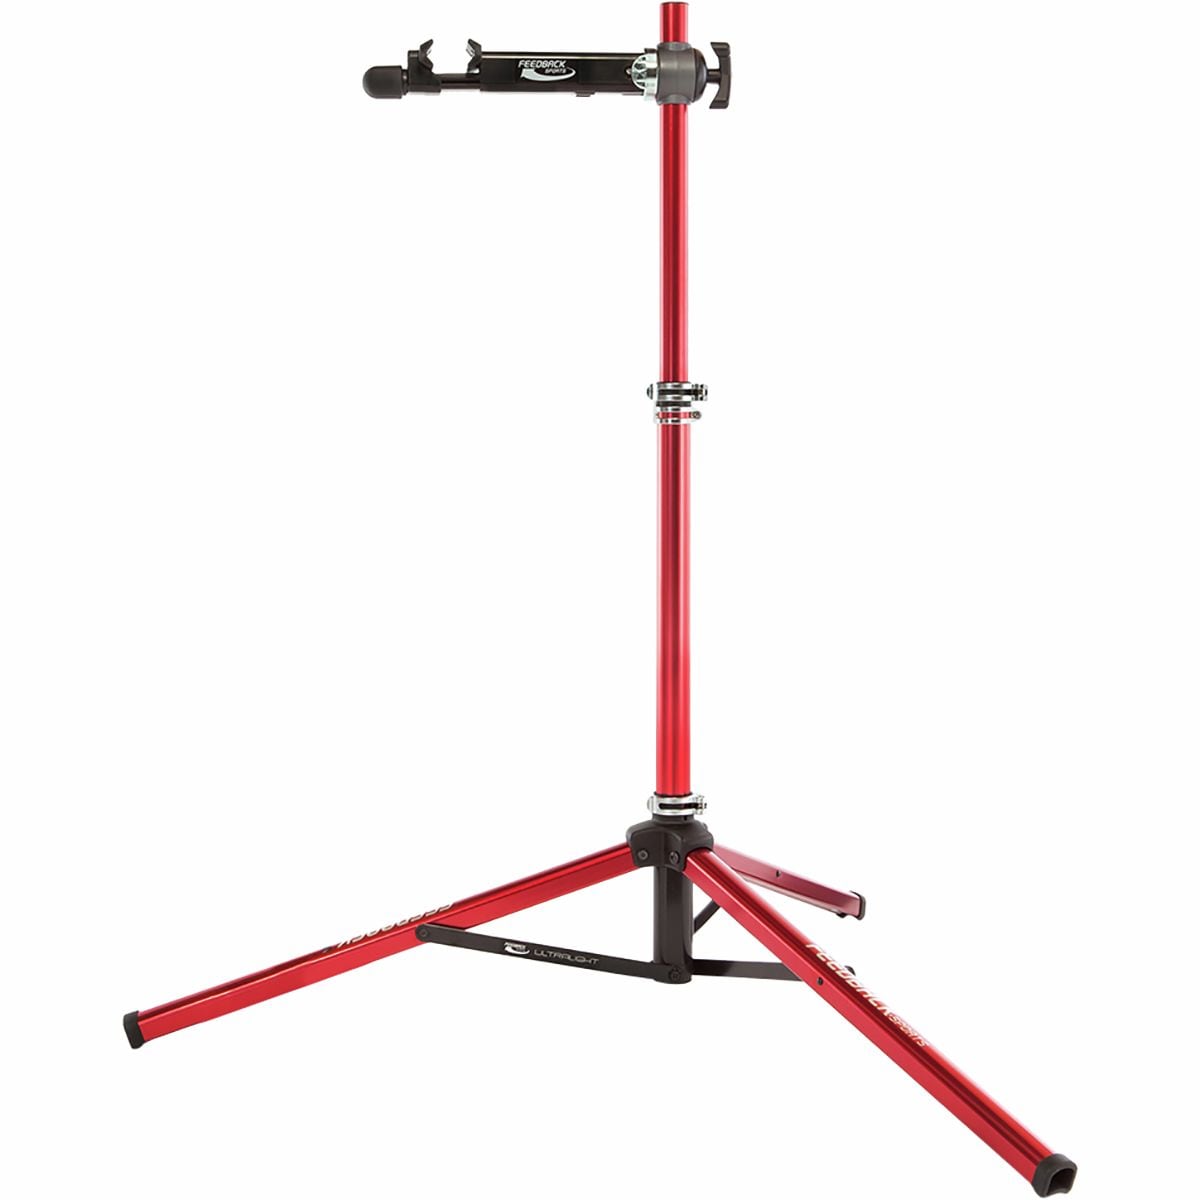 Feedback Sports Pro Ultralight Bicycle Repair Stand - Accessories